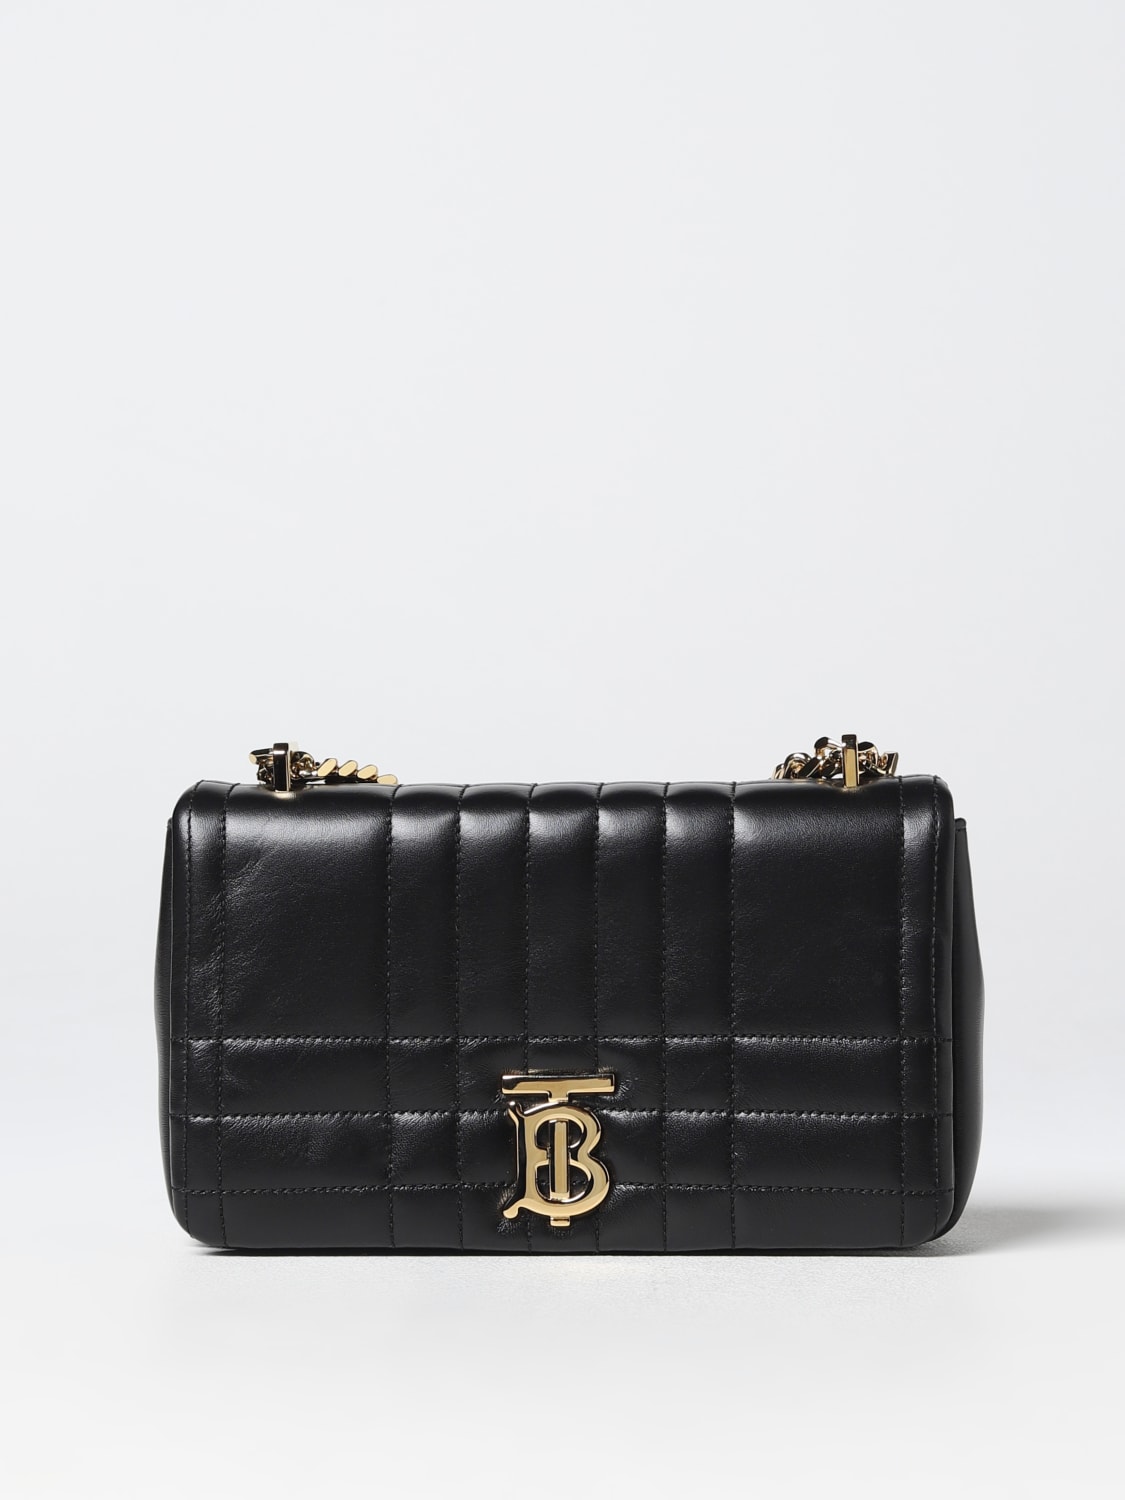 BURBERRY Lola Small Quilted Leather Shoulder Bag Black